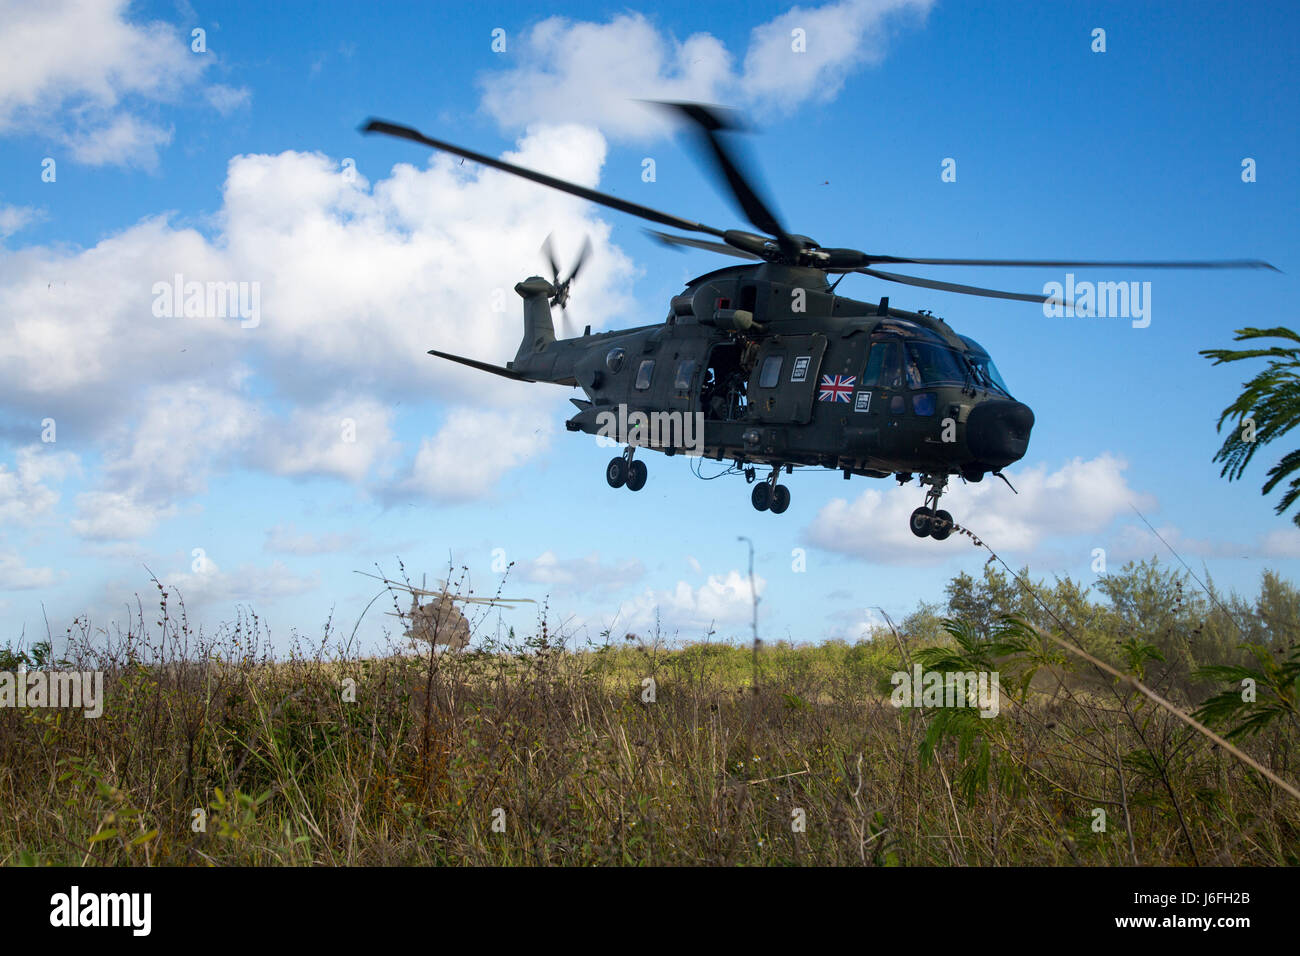 A paid of British MK3 Merlin helicopters lift off after inserting U.S. Marines on the Island of Tinian, in the Commonwealth of the Northern Mariana Islands, May 16, 2017. Marines and Sailors are participating in a two week integrated exercise, Jeanne D’ Arc. The French-led exercise which strengthens strategic partnerships and exercising freedom of navigation operations across the Indo-Asia-Pacific region. . (U.S. Marine Corps photo by MCIPAC Combat Camera Lance Cpl. Caleb T. Maher) Stock Photo